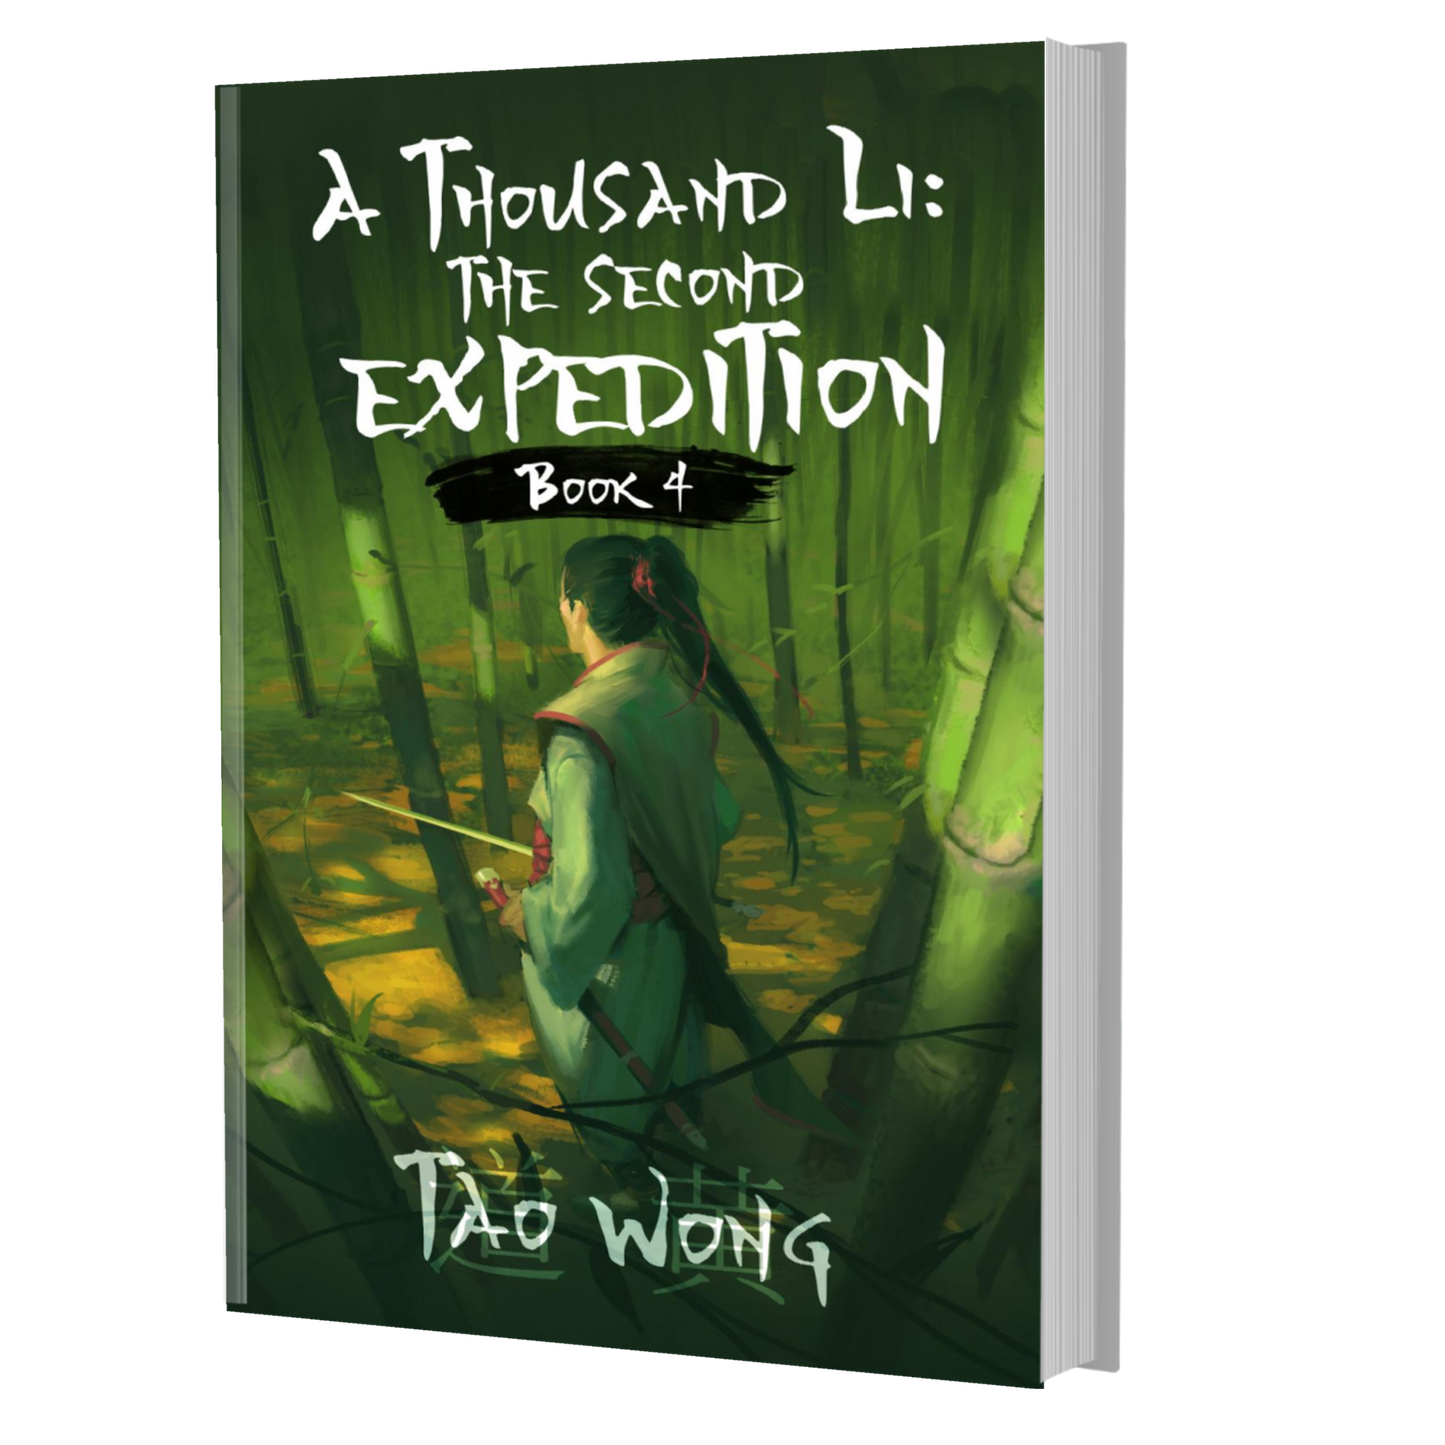 The Second Expedition (A Thousand Li #4)